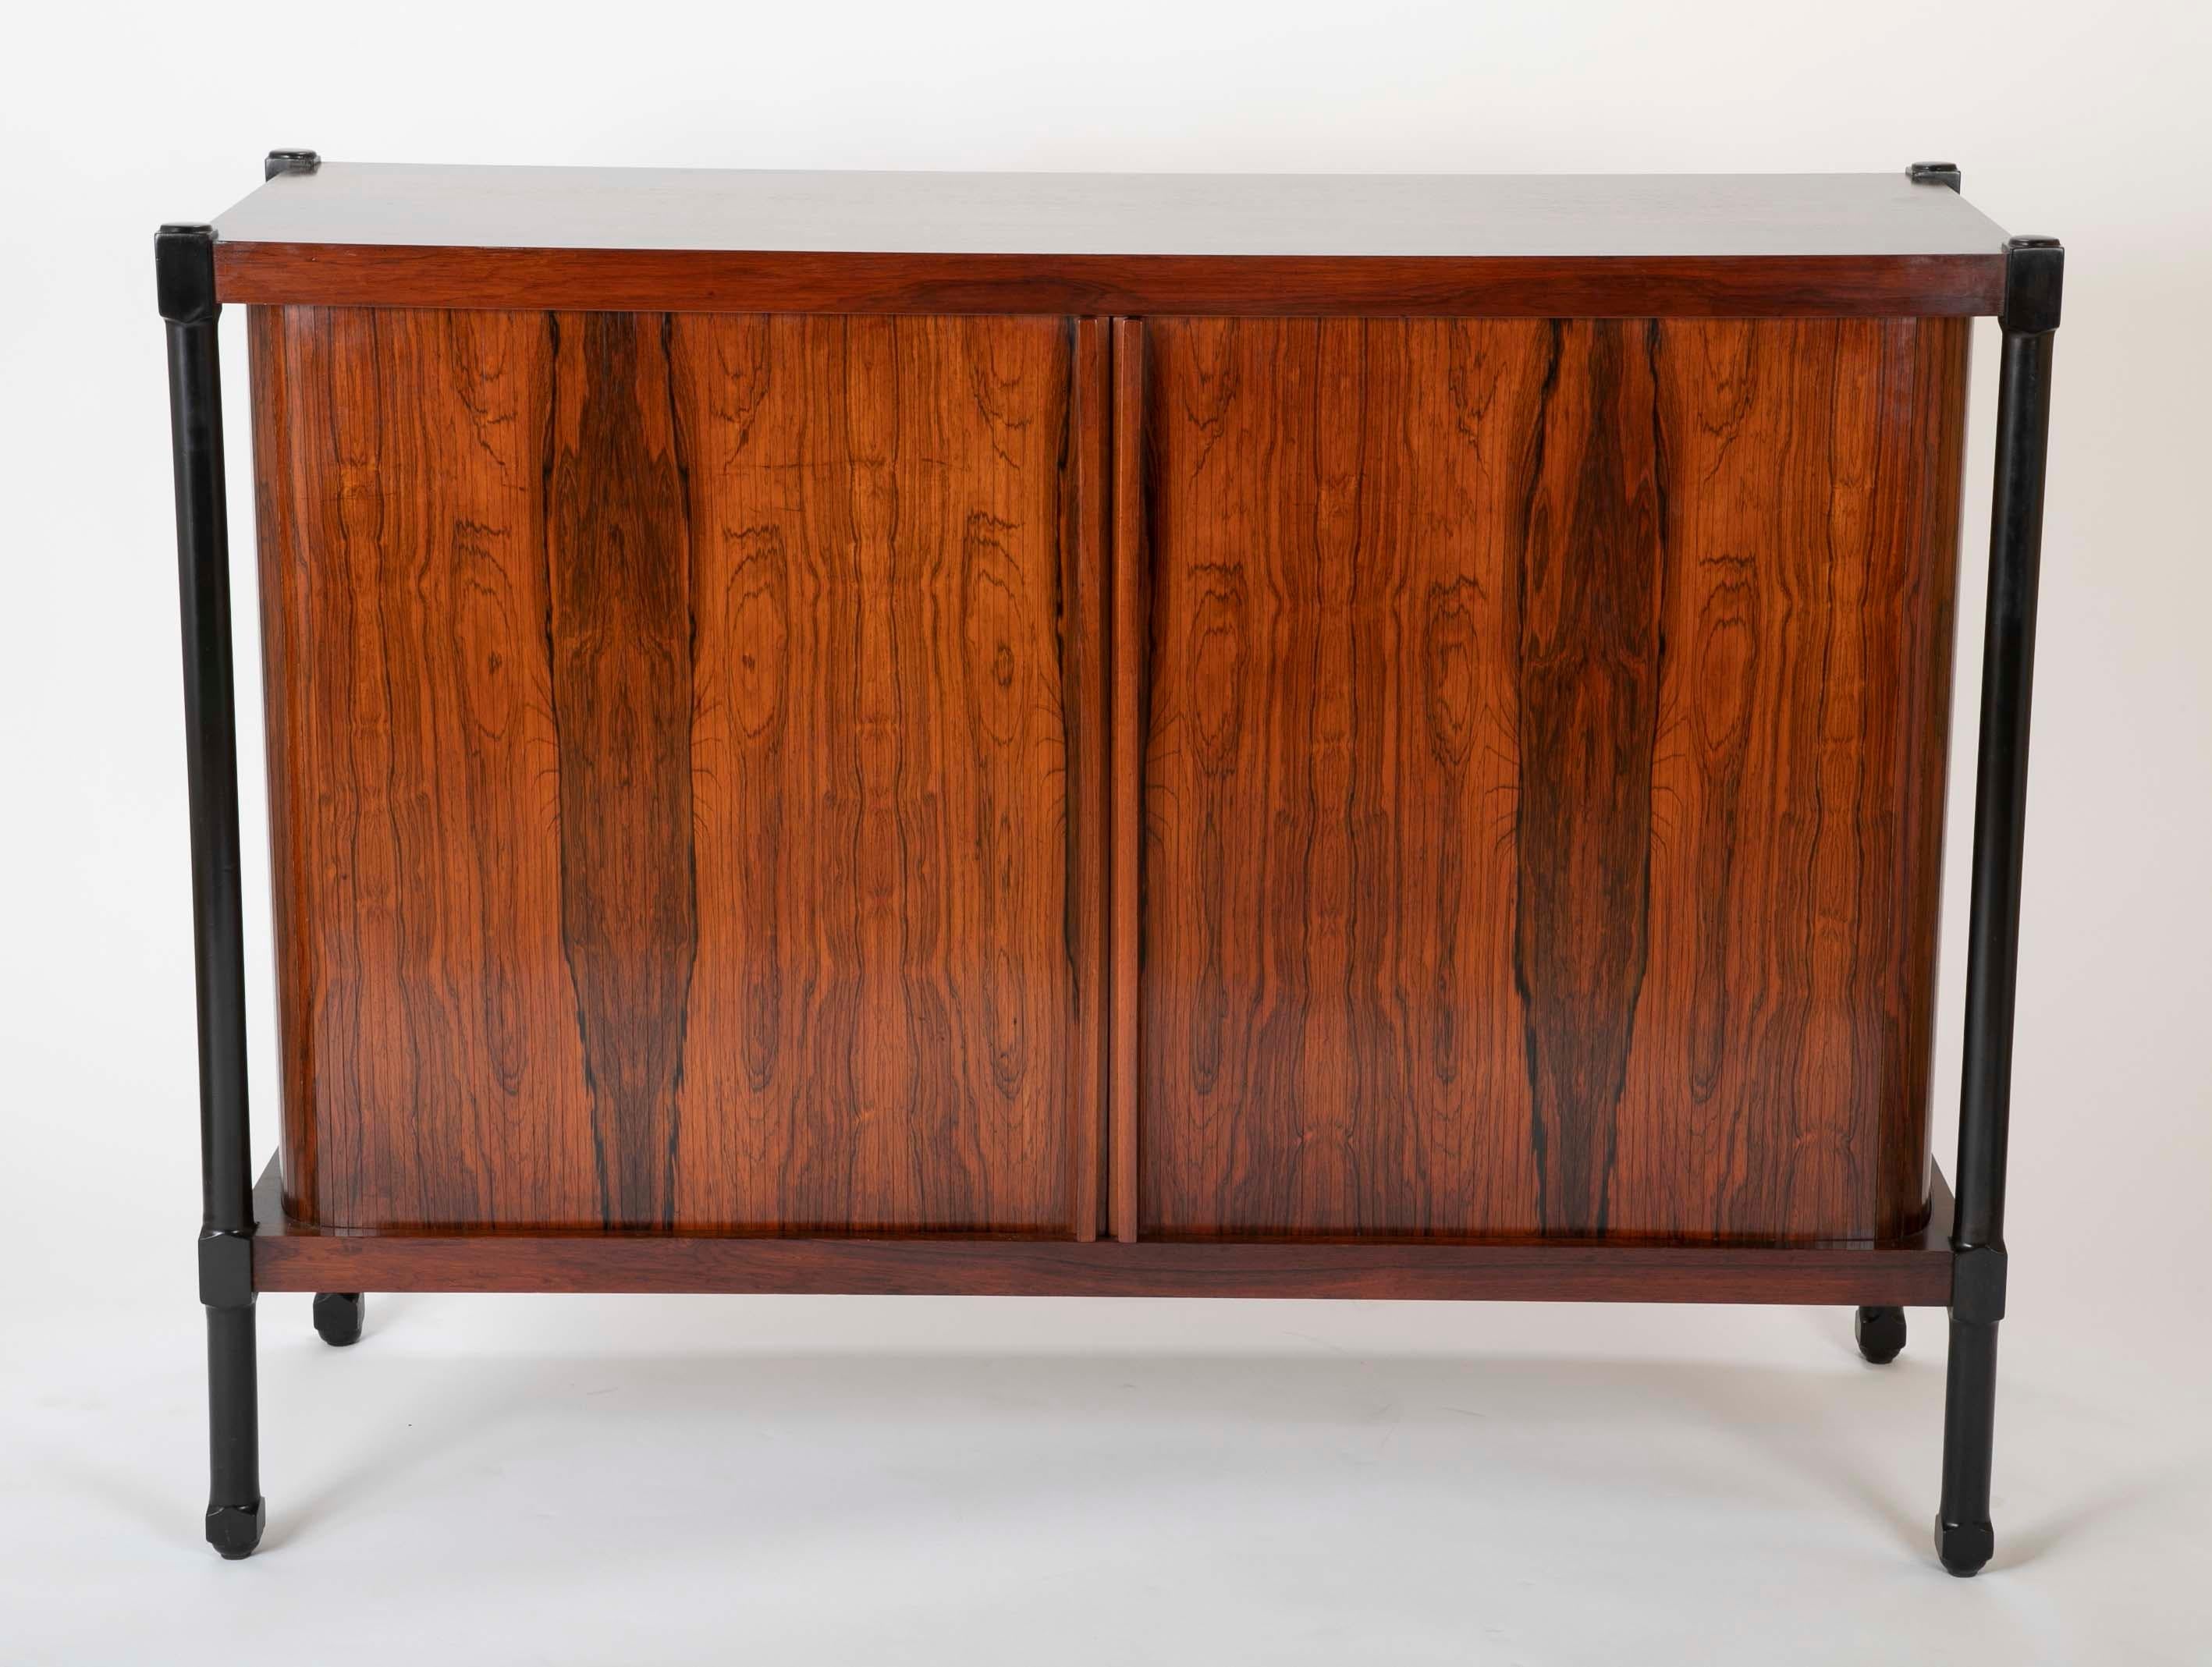 A striking pair of rosewood cabinets with tambour doors rising on ebonized legs. One cabinet with six drawers and two shelves. The other cabinet has four shelves. Unmarked.